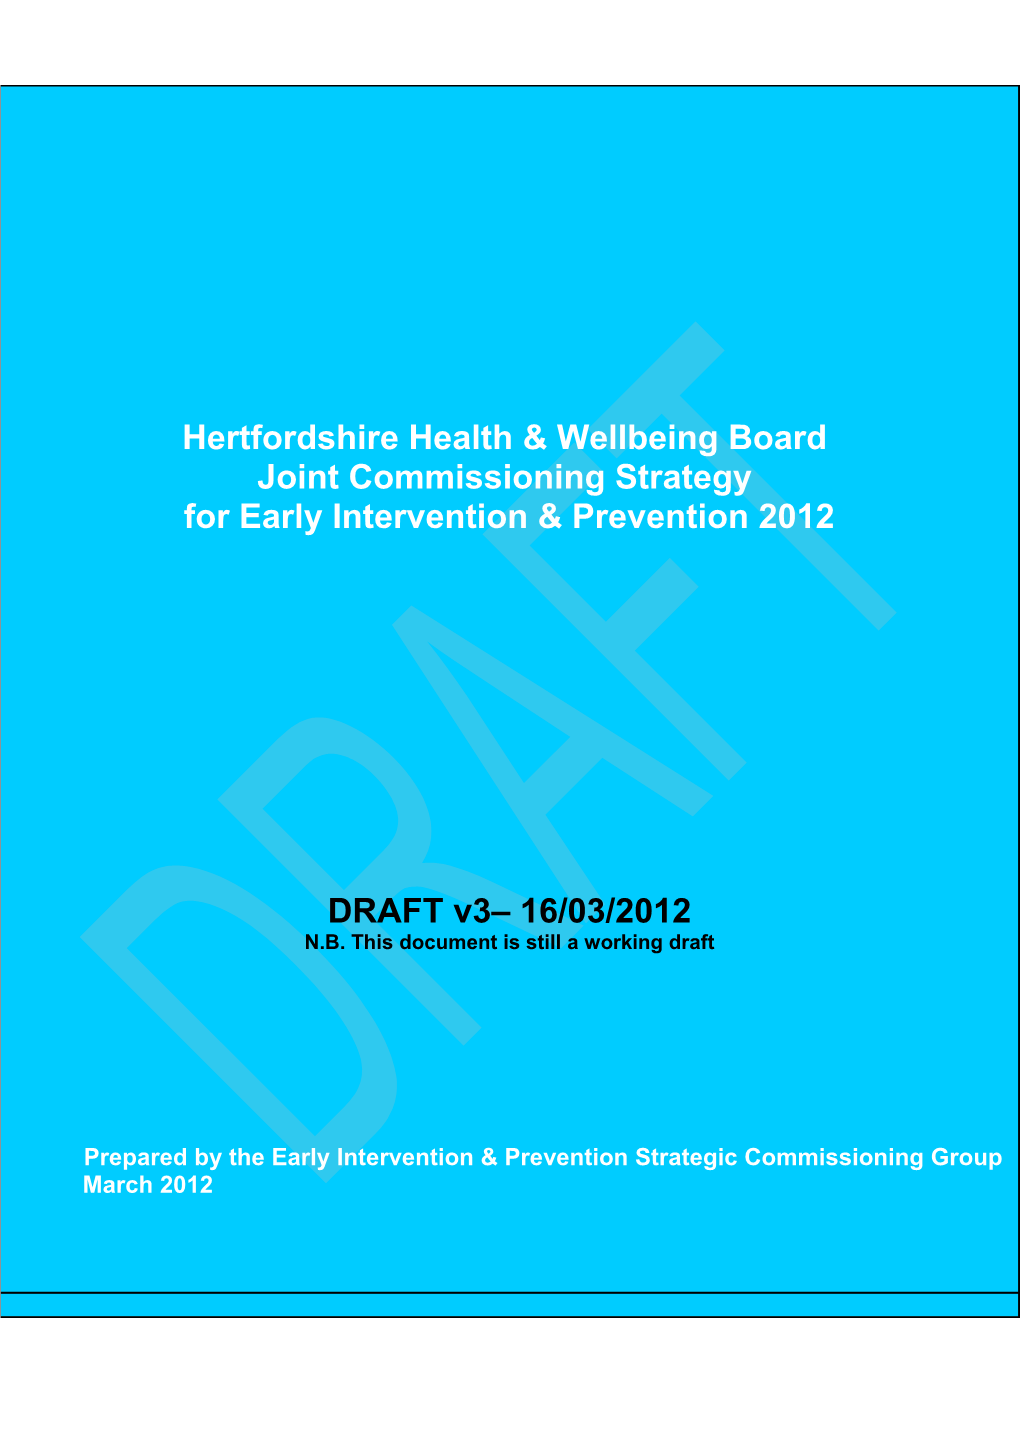 Foreword from the Chair of the Early Intervention & Prevention Commissioning Group